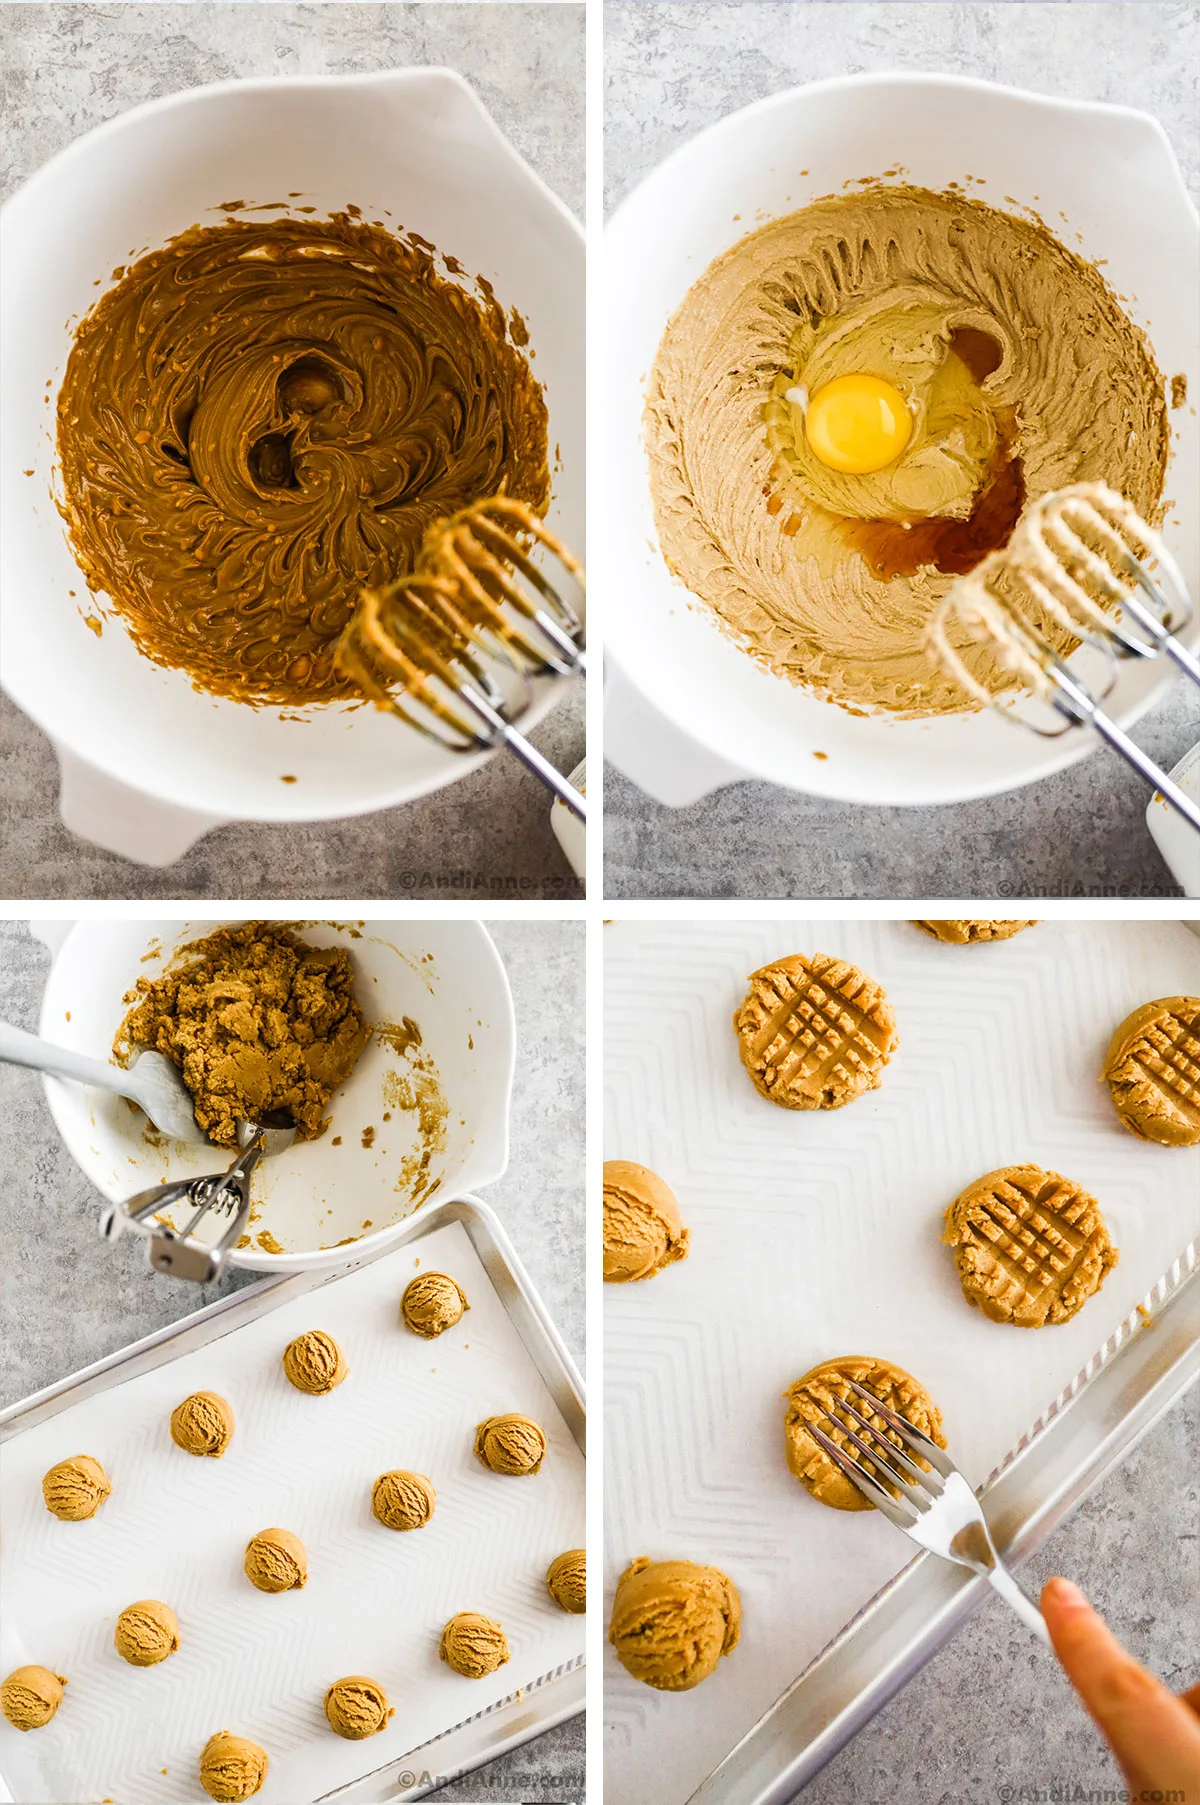 Four images with steps to make recipe. First is creamed butter and peanut butter in a bowl with electric mixer. Second is creamed mixture with egg and vanilla on top in bowl, fourth is a baking sheet with scoops of cookie dough and bowl with dough beside it. Fourth image is close up of cookies with forks pressed to create a criss cross pattern.